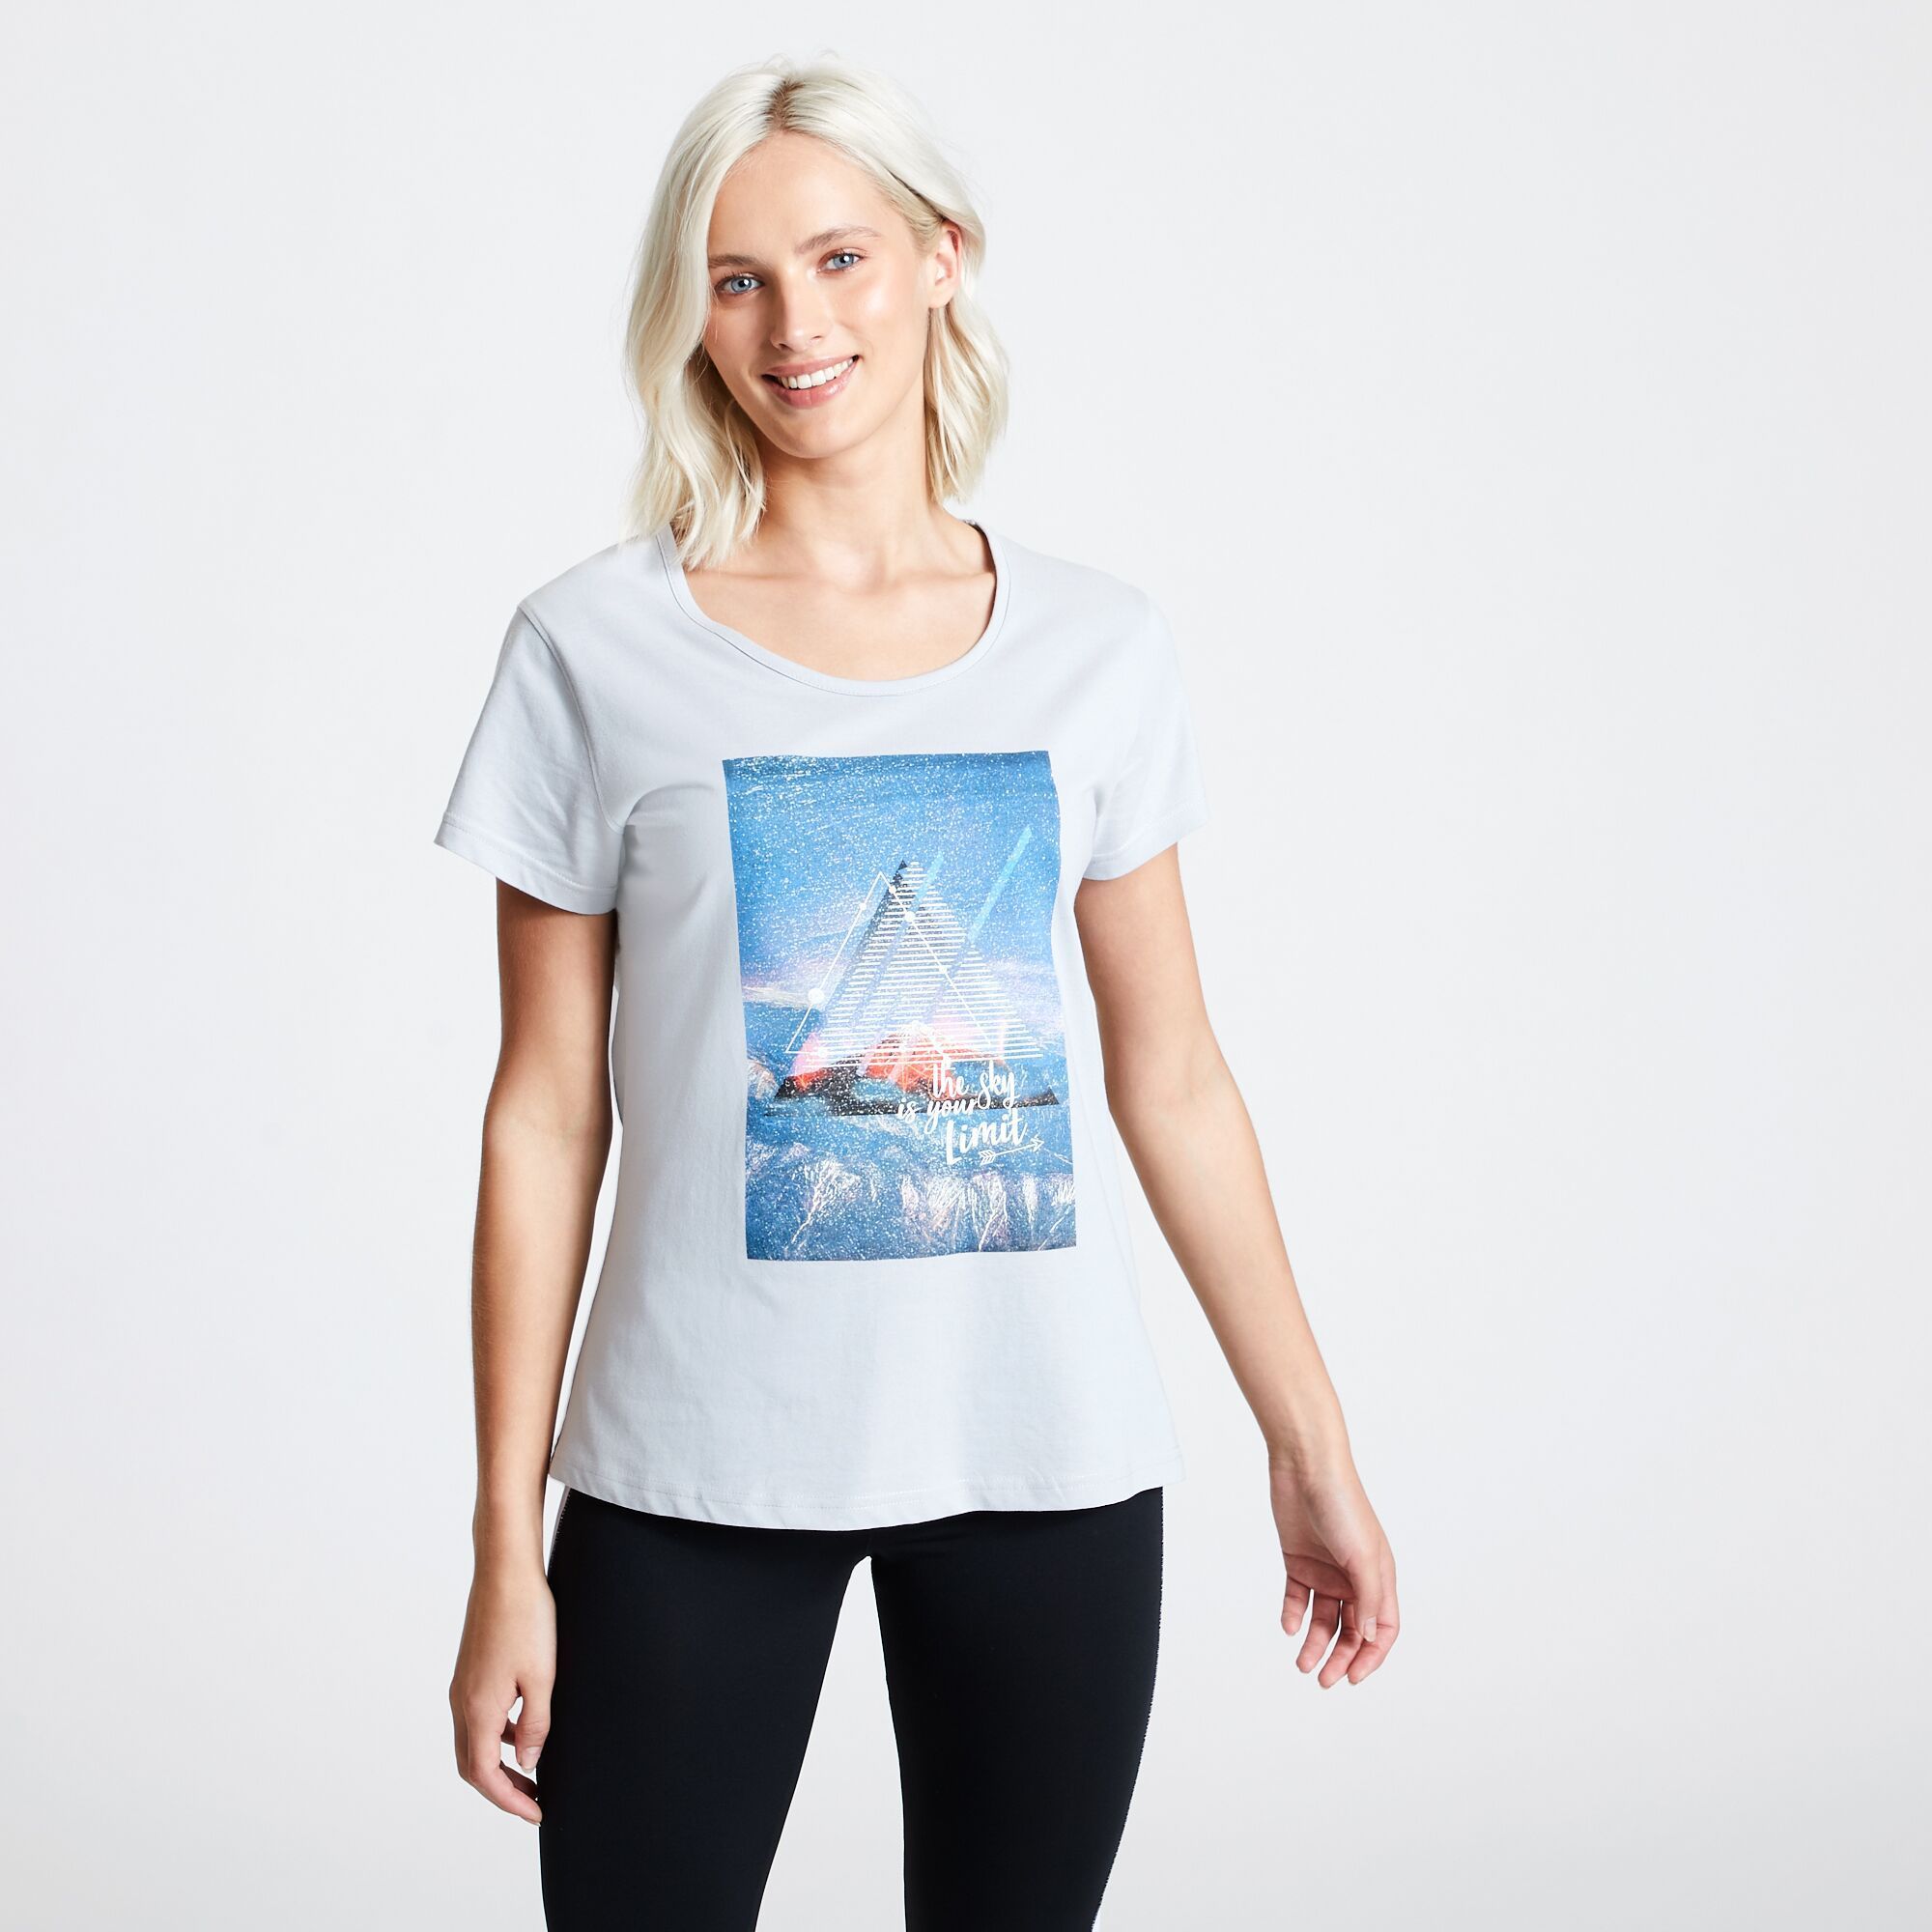 Material: 100% Cotton. Extra comfy slim fit short sleeved shirt with round neckline. Light-to-wear, soft feel. Features a dreamy artwork and quote design.